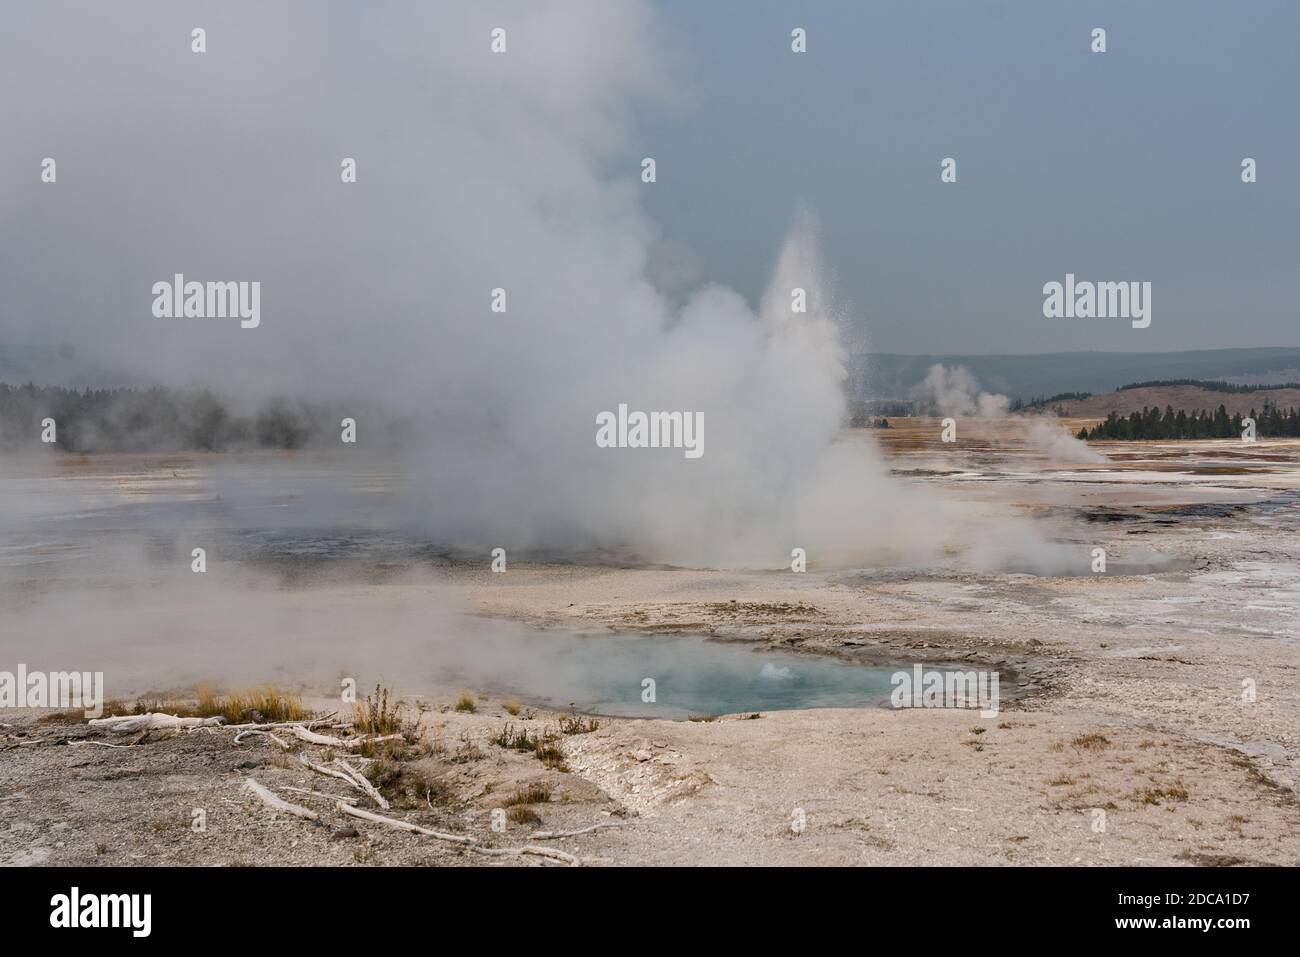 Clepsydra Geyser erupting with Spasm Geyser bubbling in the foreground in the Lower Geyser Basin in Yellowstone National Park, Wyoming, USA. Stock Photo